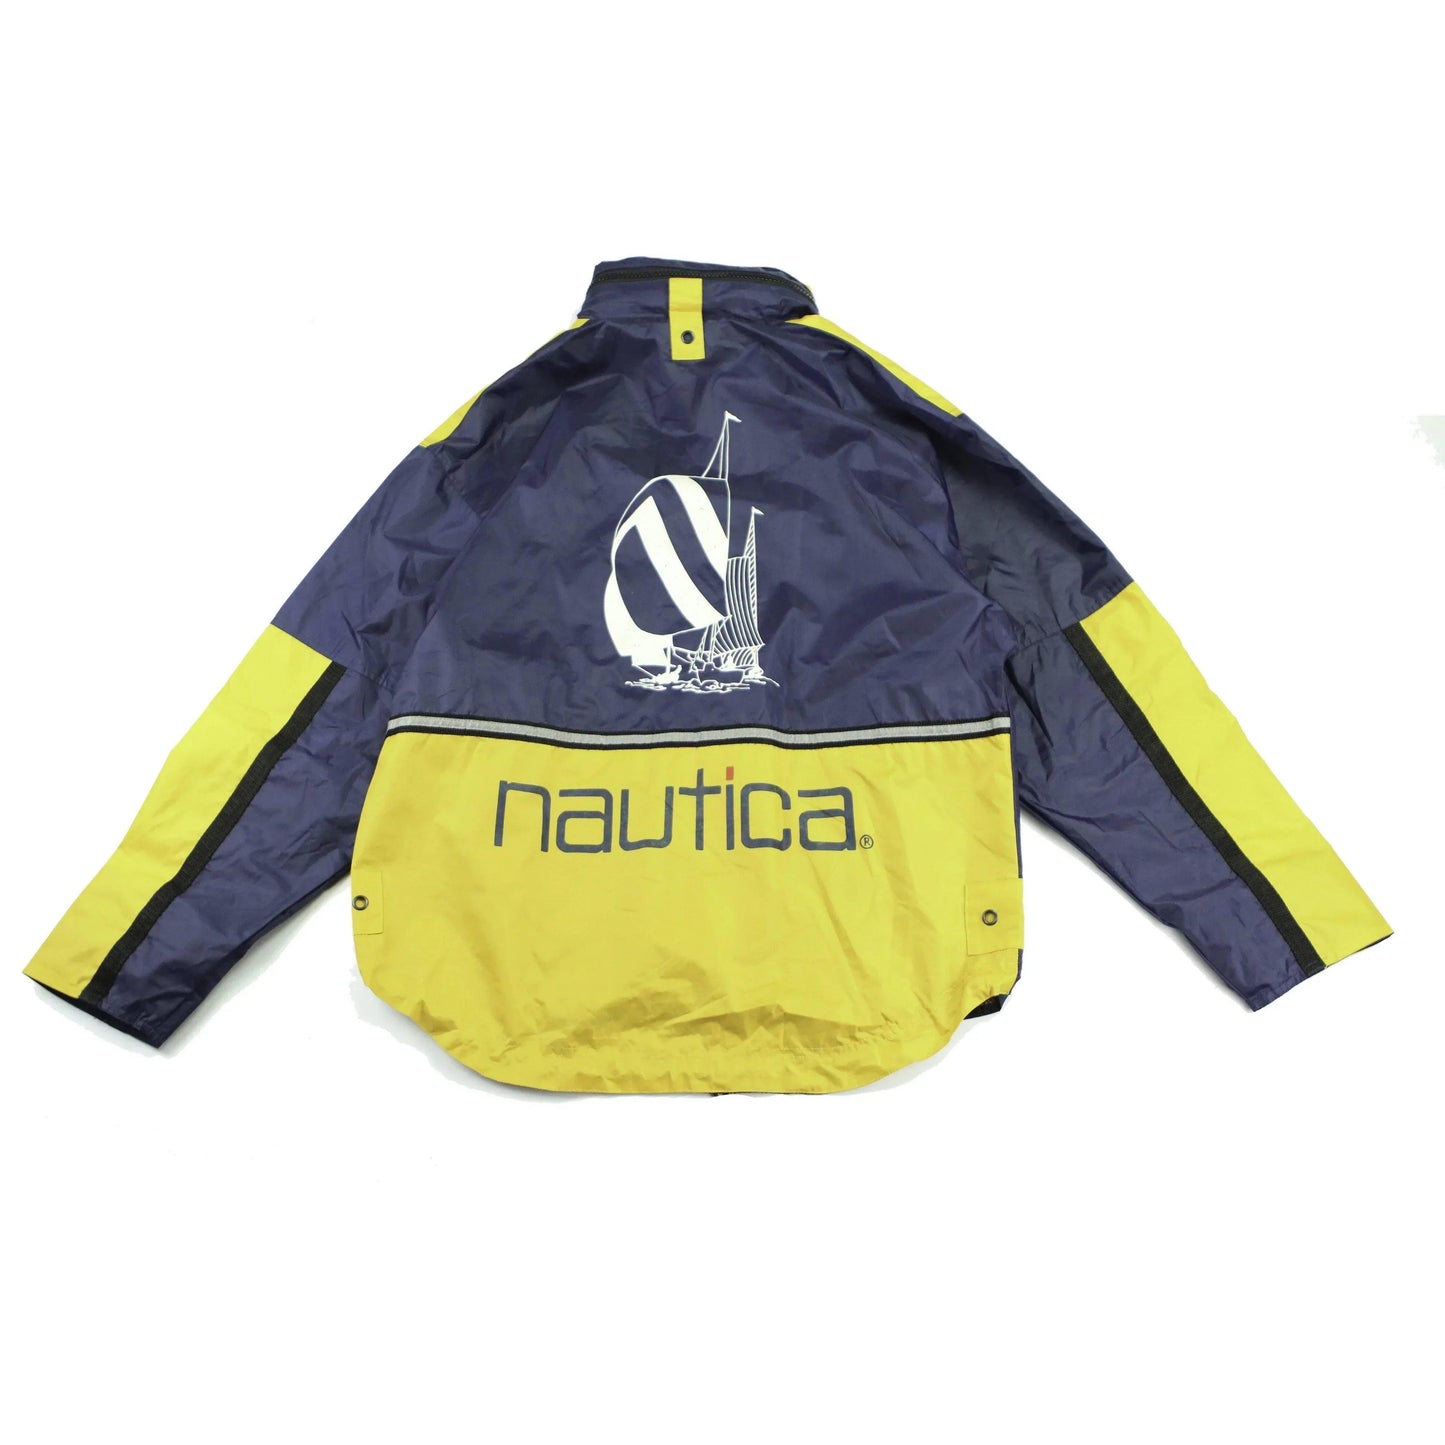 NAUTICA COMPETITON SPINNAKER JACKET (M) - Known Source